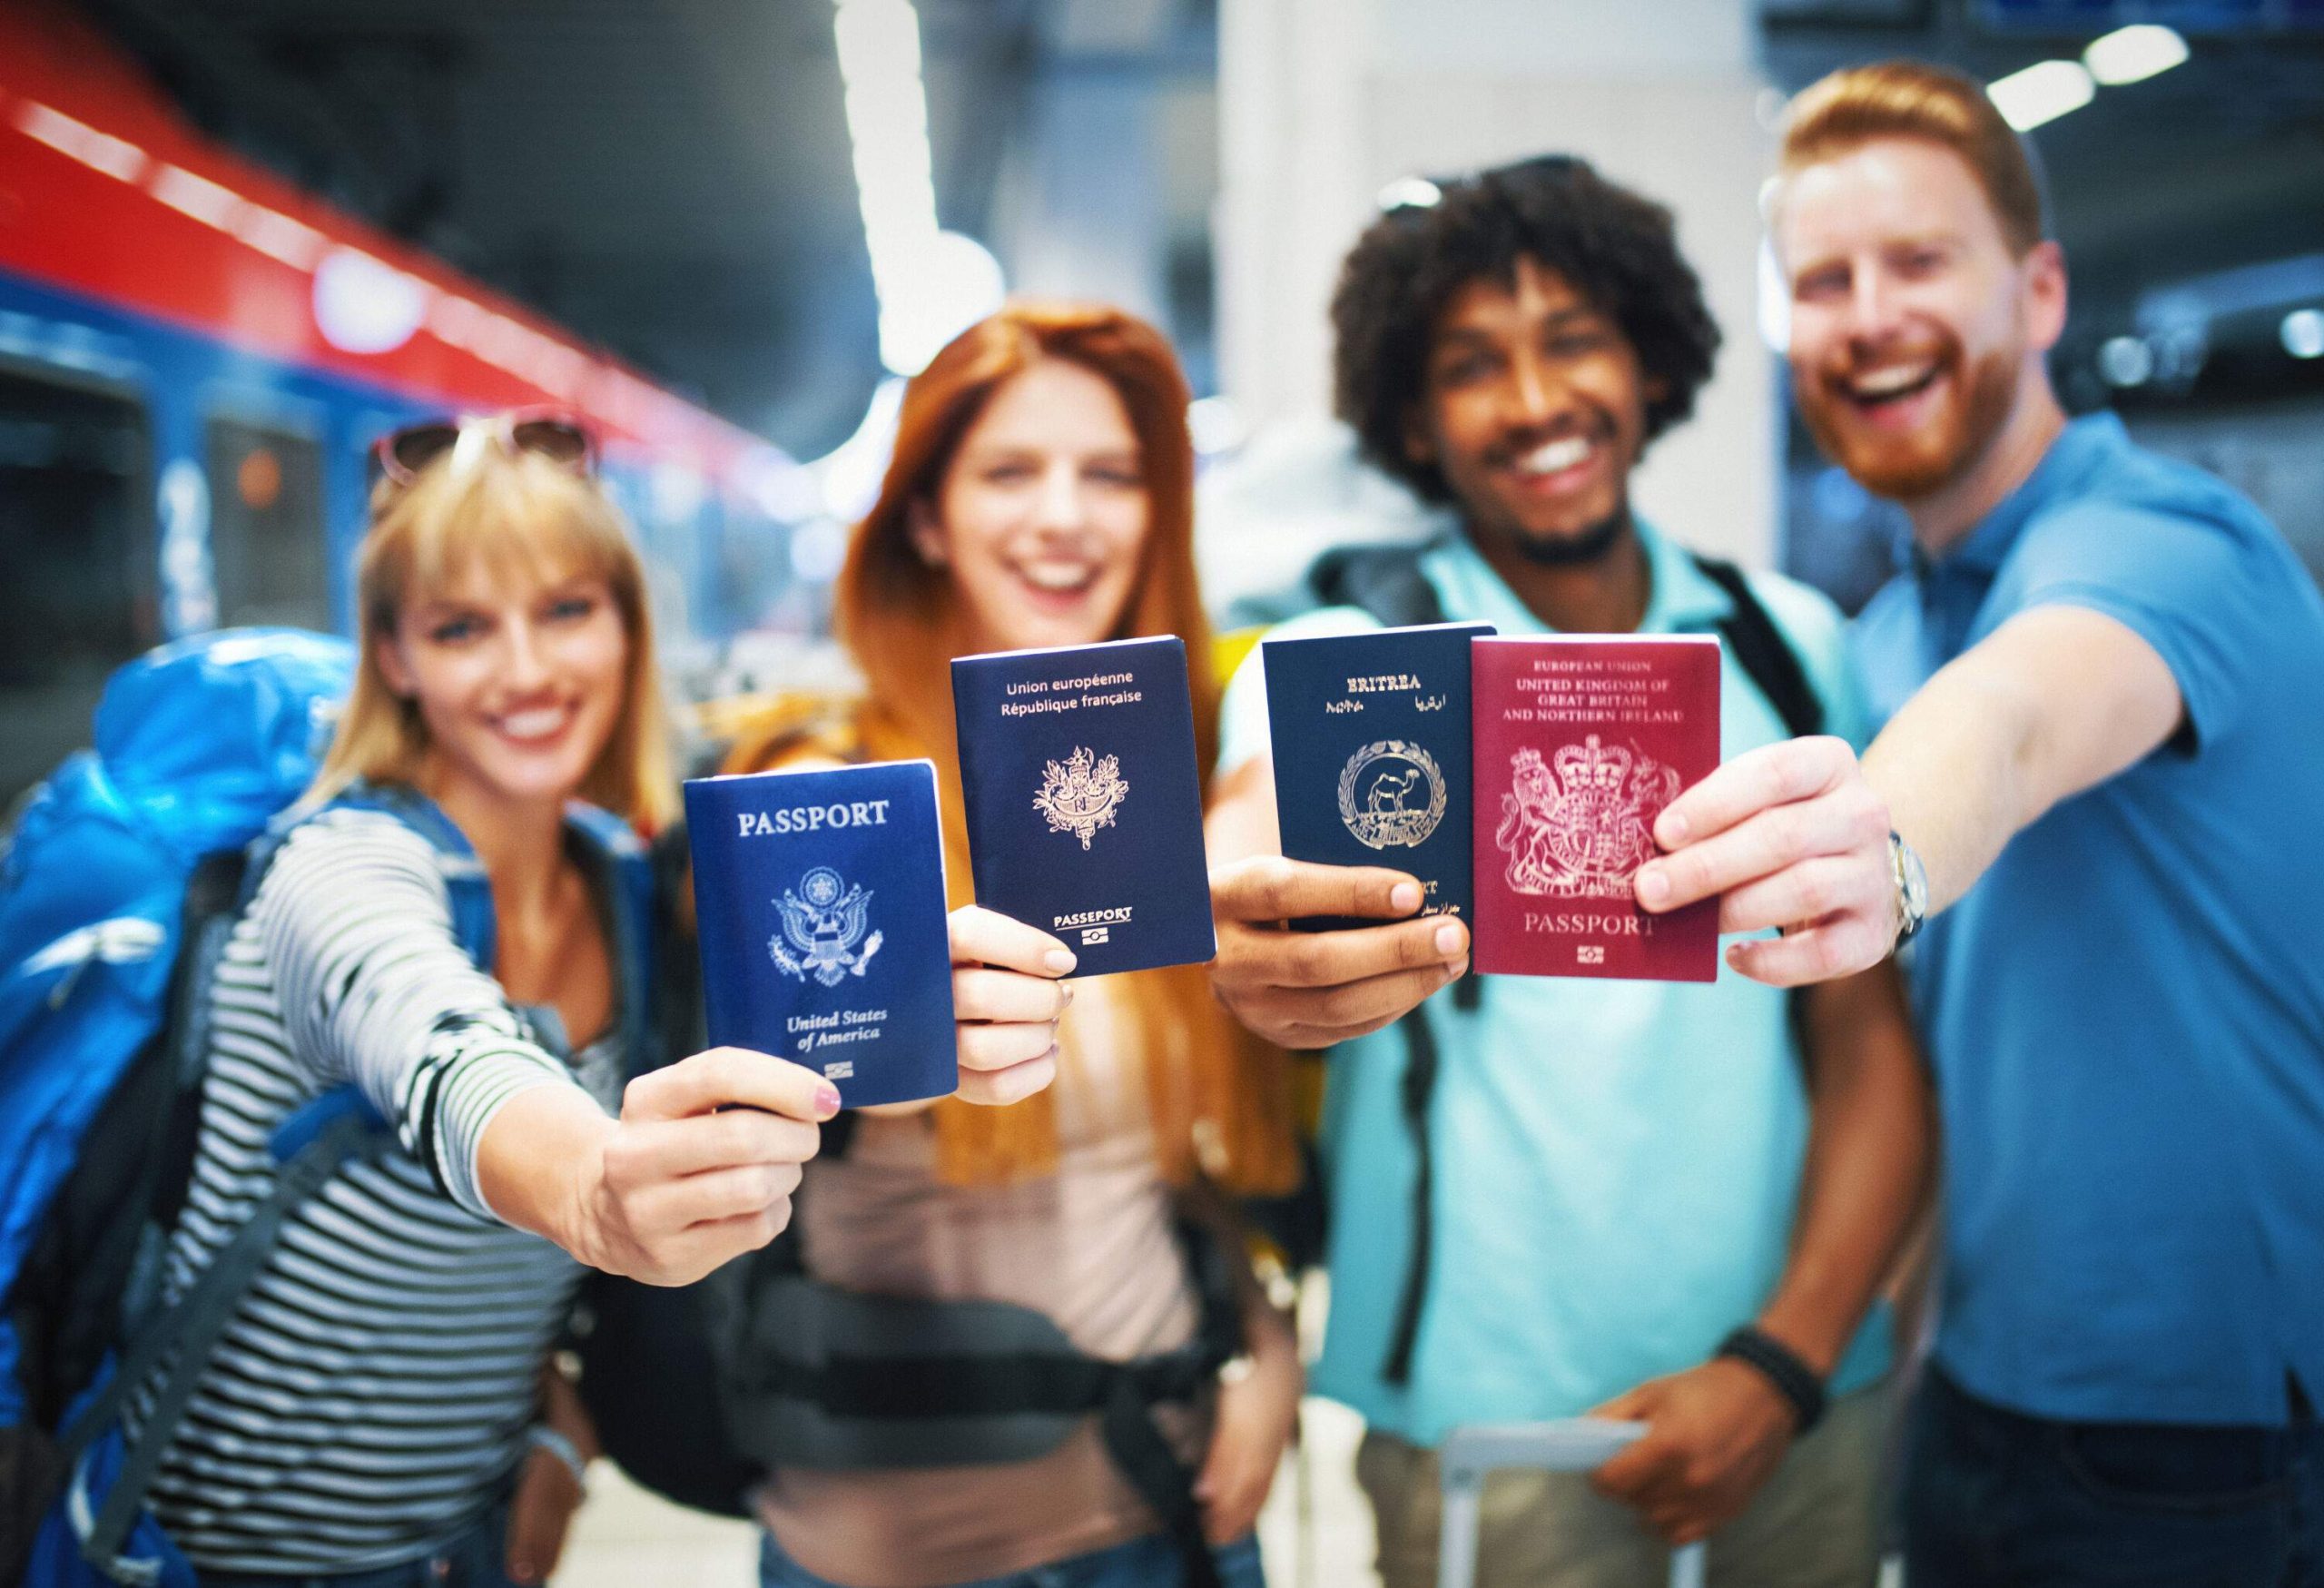 Closeup of group of young adults showing their passports to the camera. They are at a train station, ready for their summer trip.